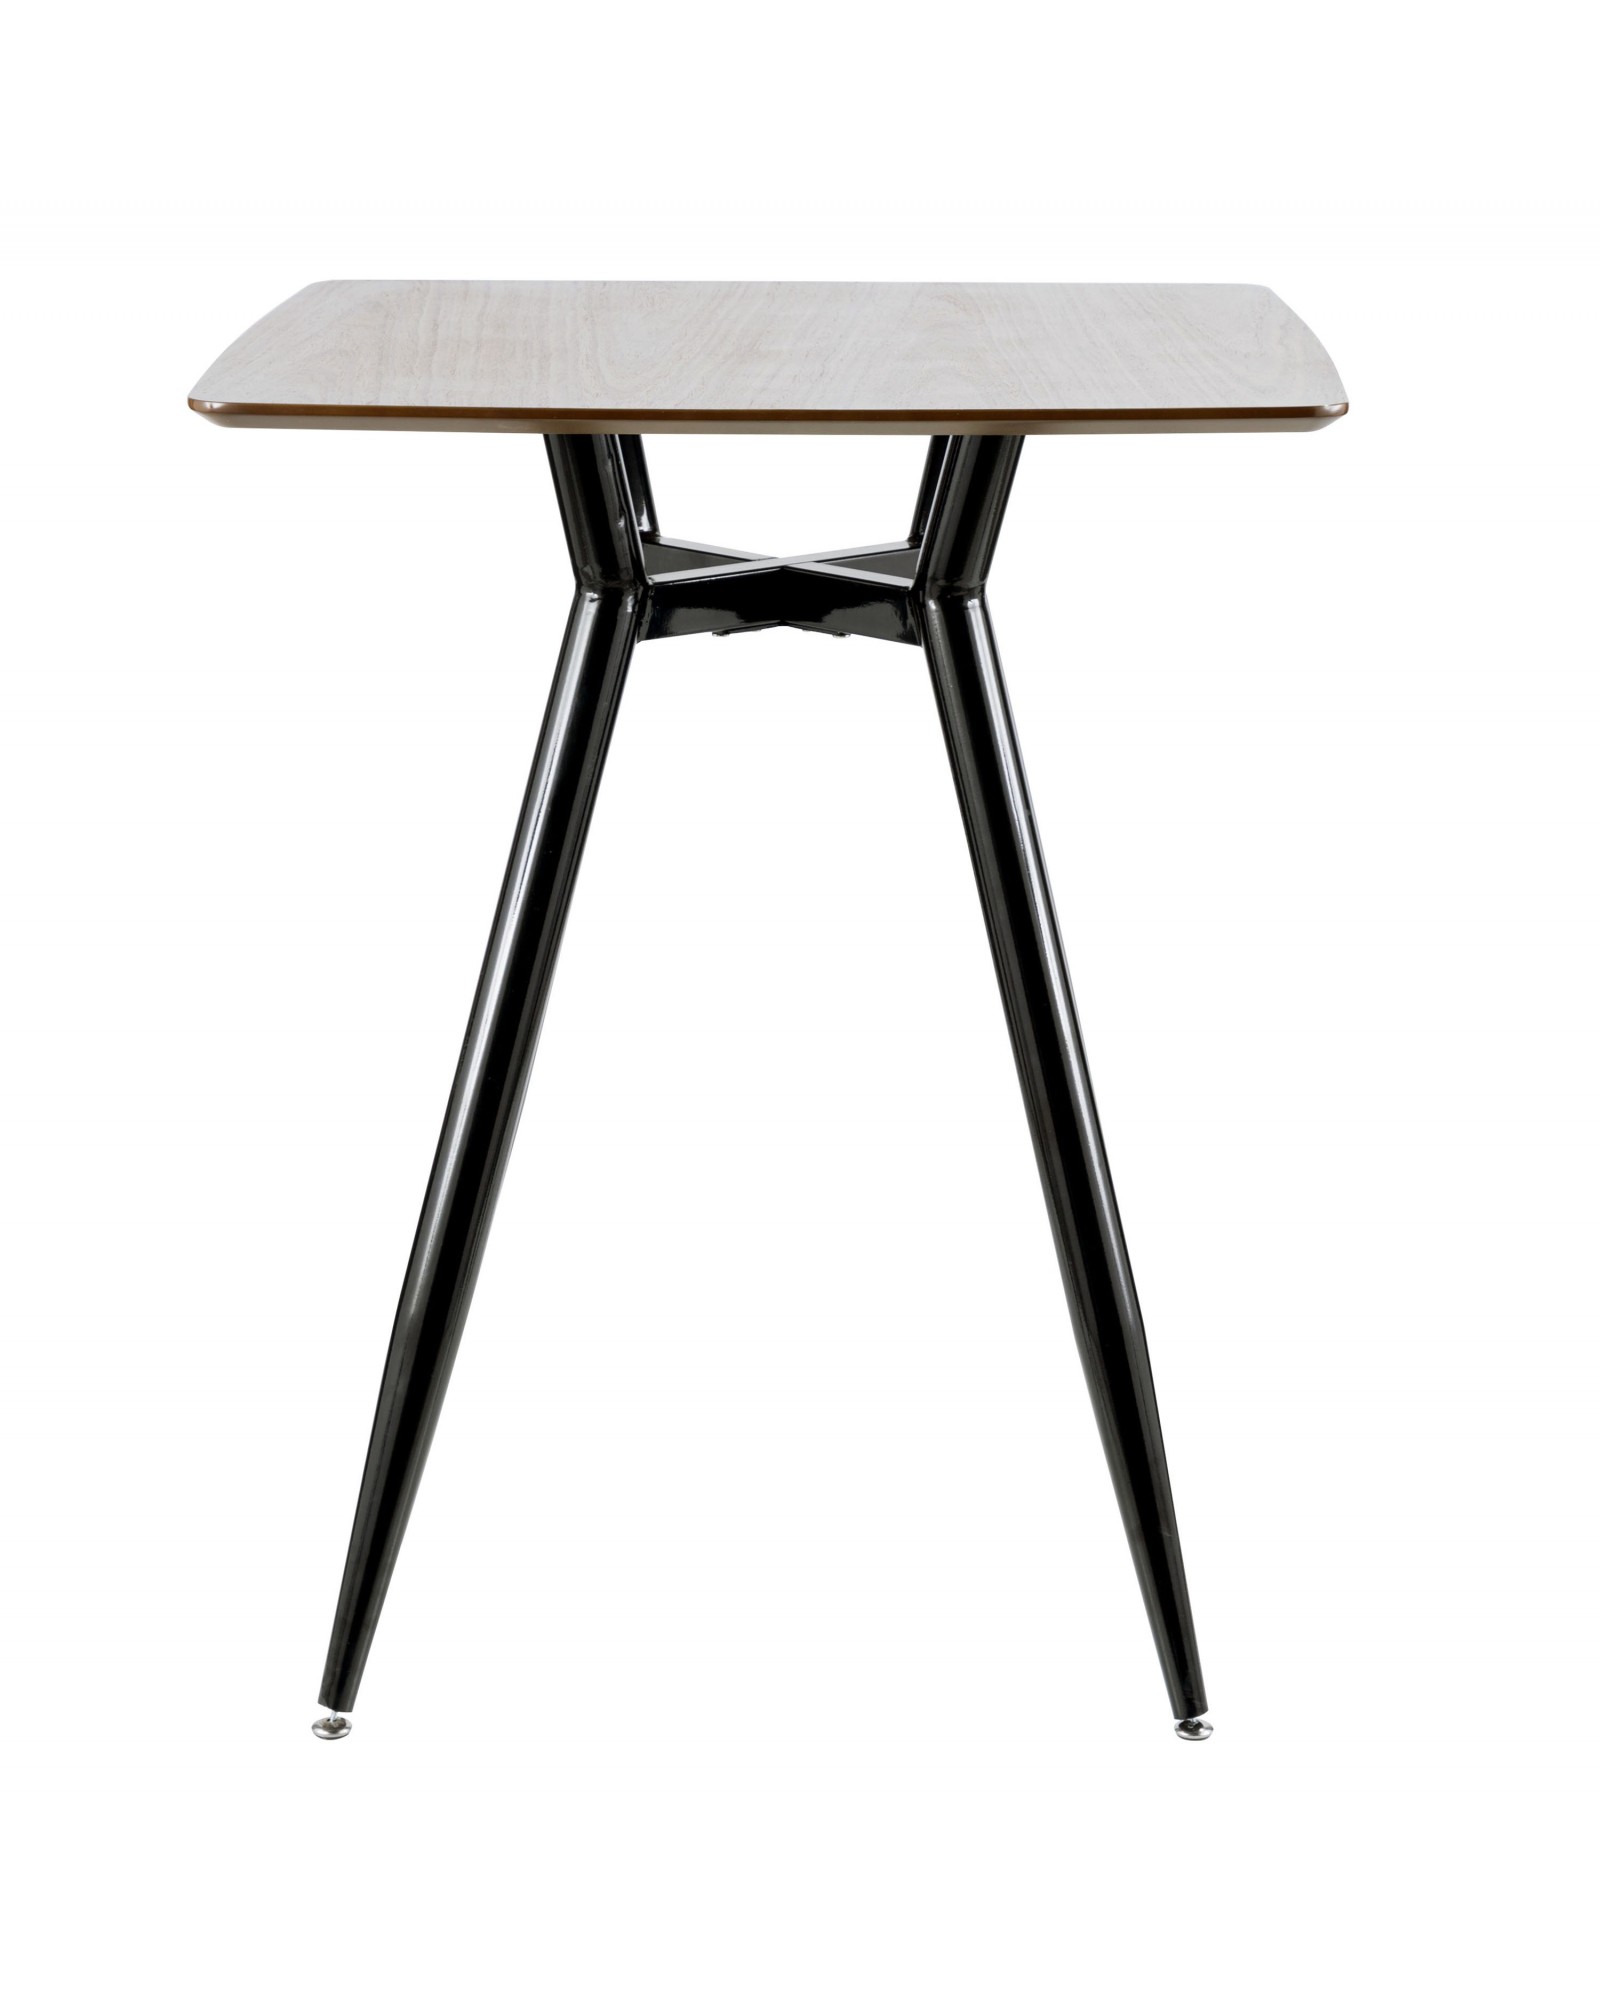 Clara Mid-Century Modern Square Counter Table with Black Metal Legs and Walnut Wood Top